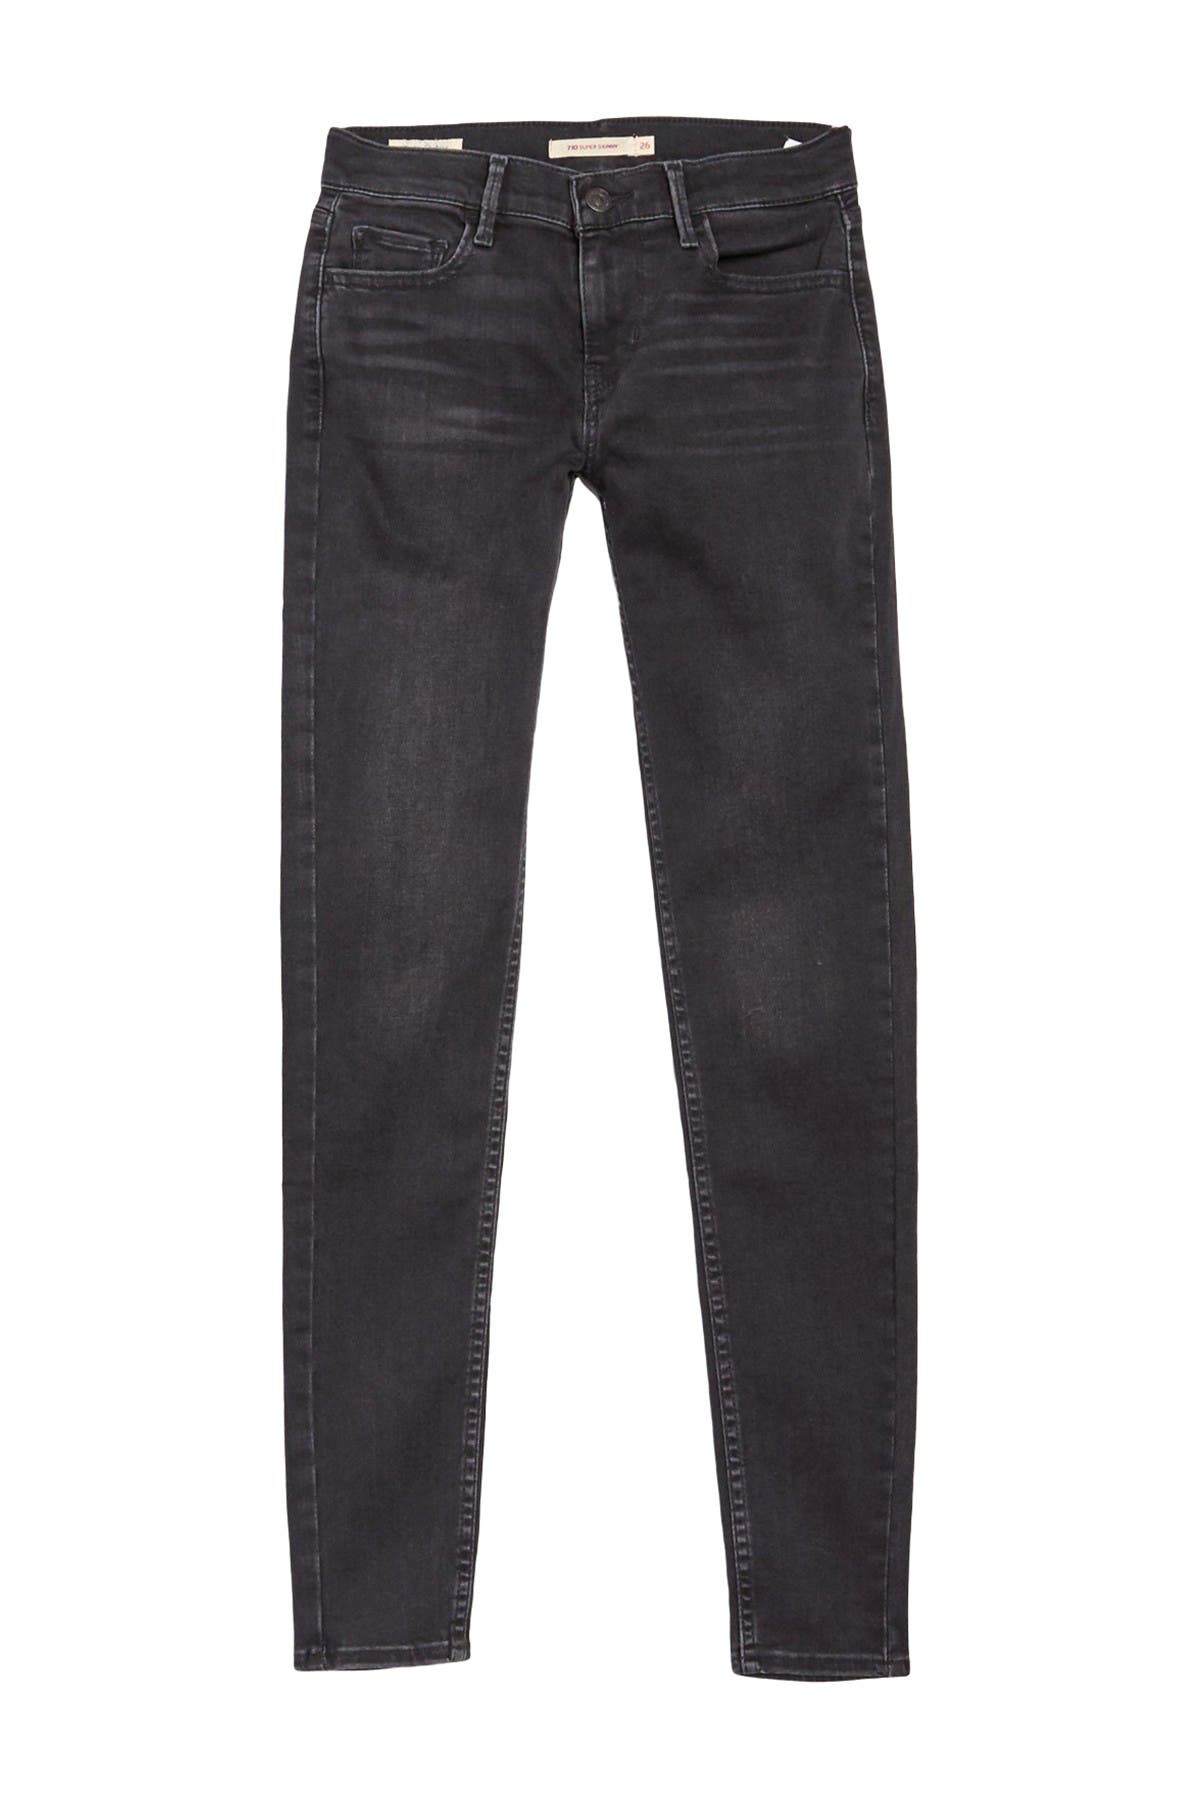 nordstrom womens jeans